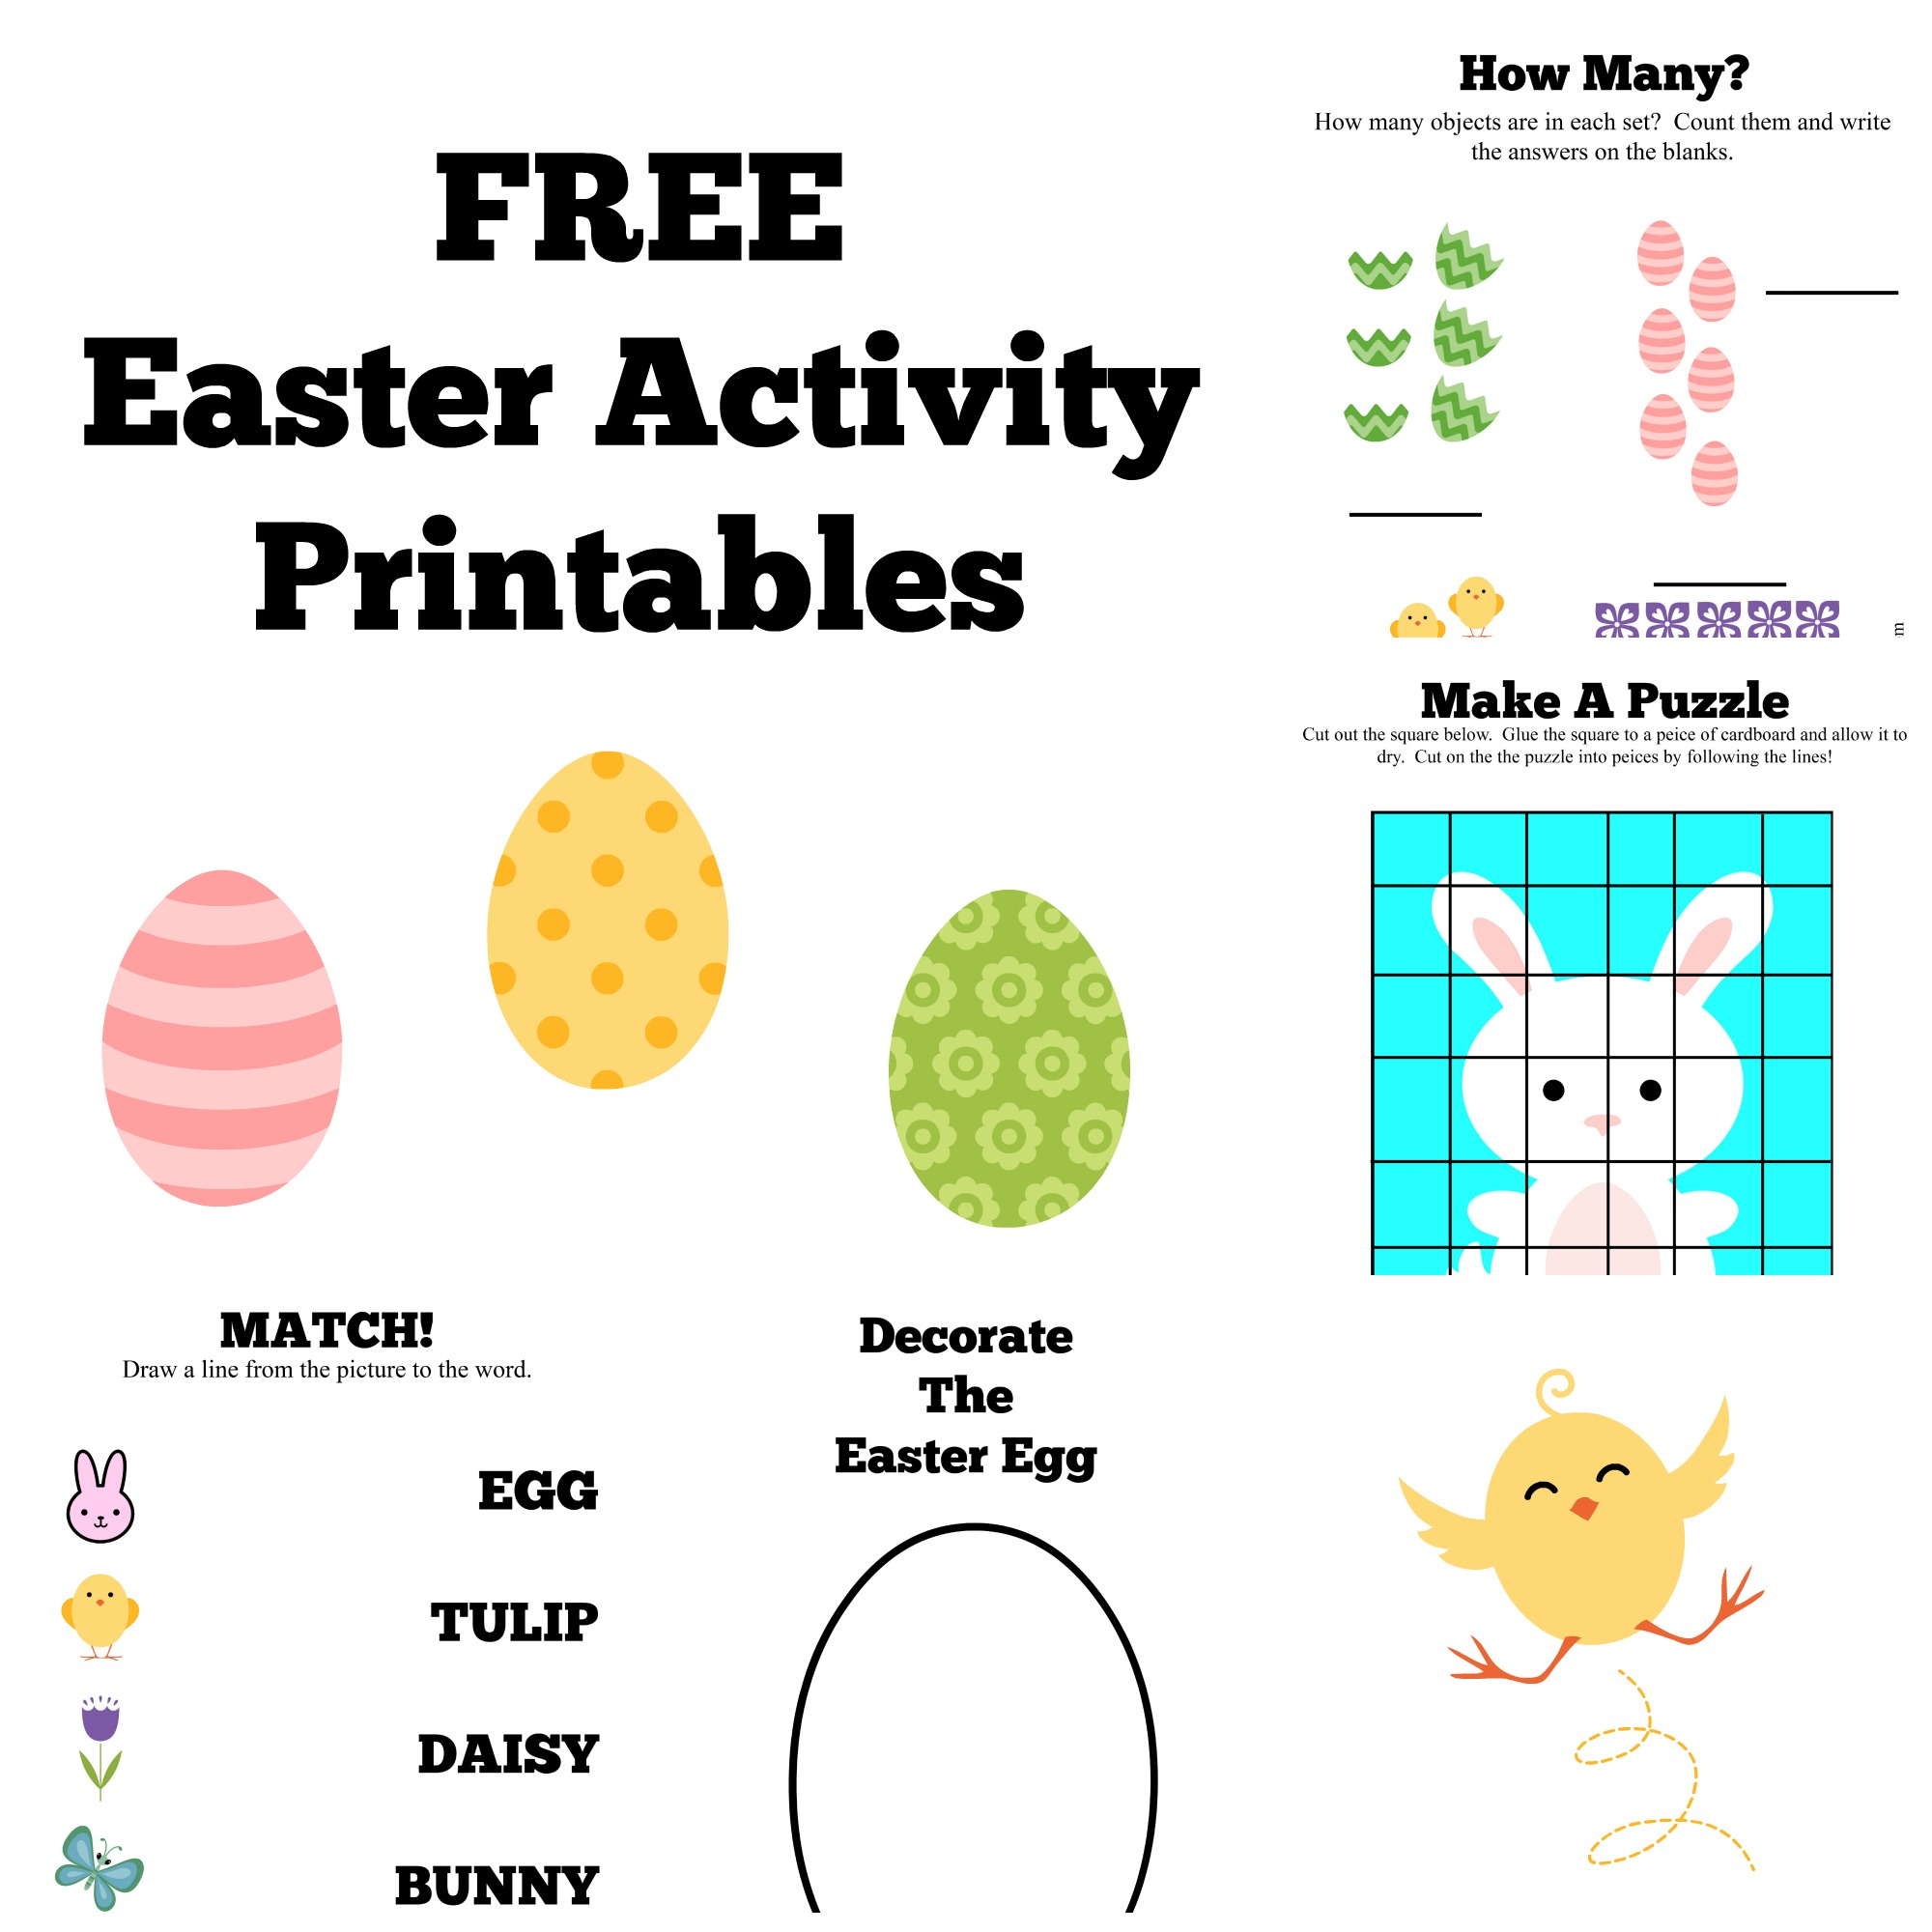 Free Easter Activity Printables {Craft &amp;amp; Learn} - - Free Printable Craft Activities